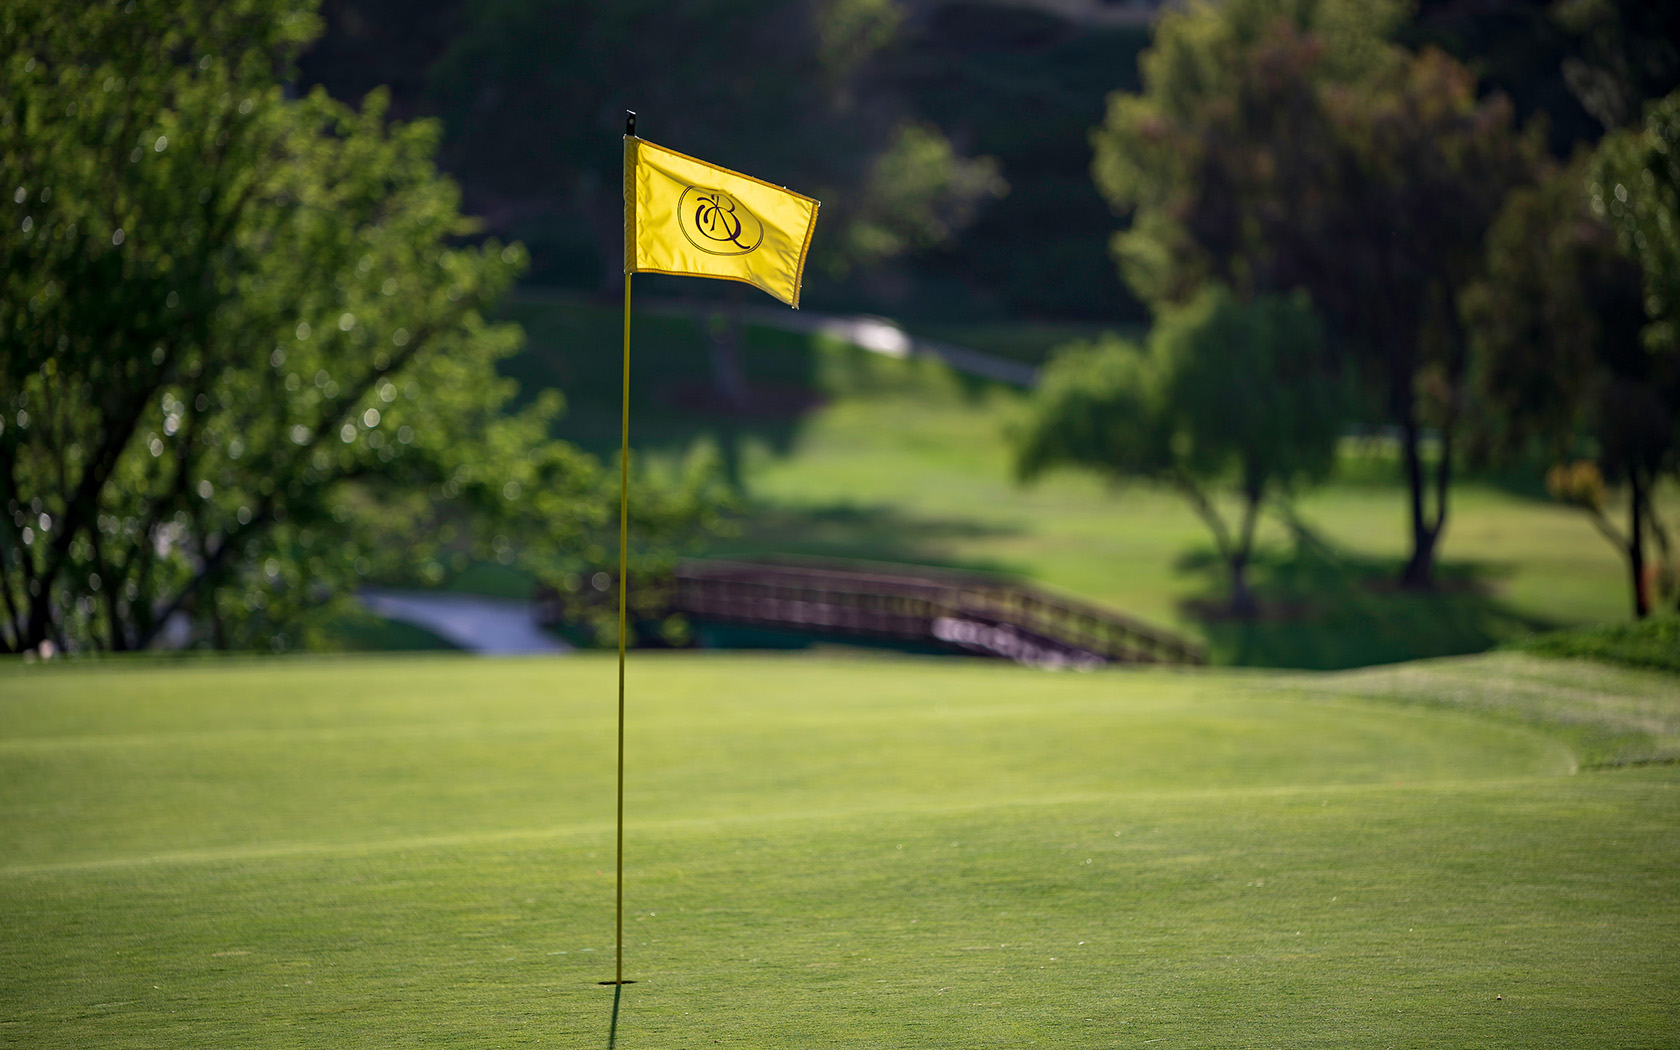 a close up of a yellow flagstick and a small wooden bridge in the background